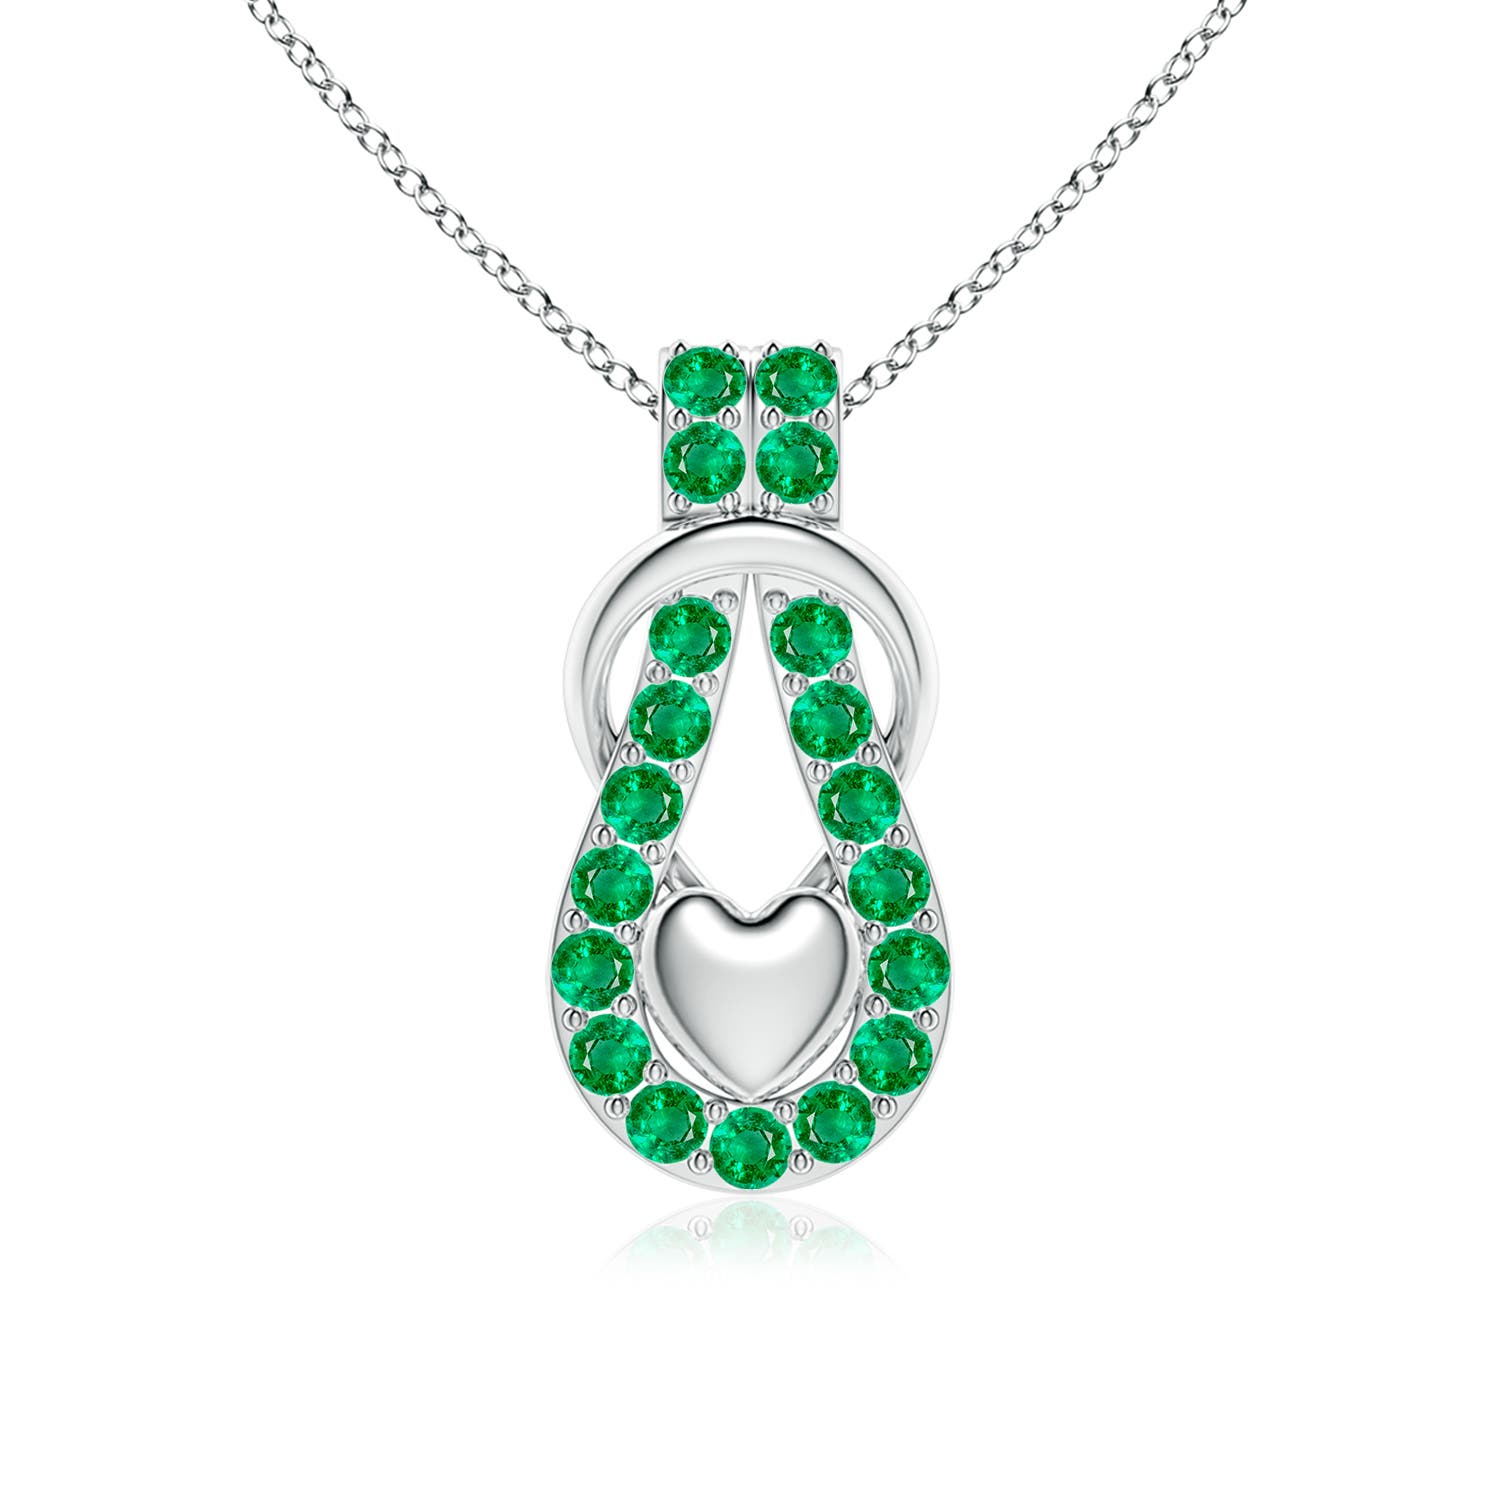 AAA - Emerald / 1.2 CT / 18 KT White Gold